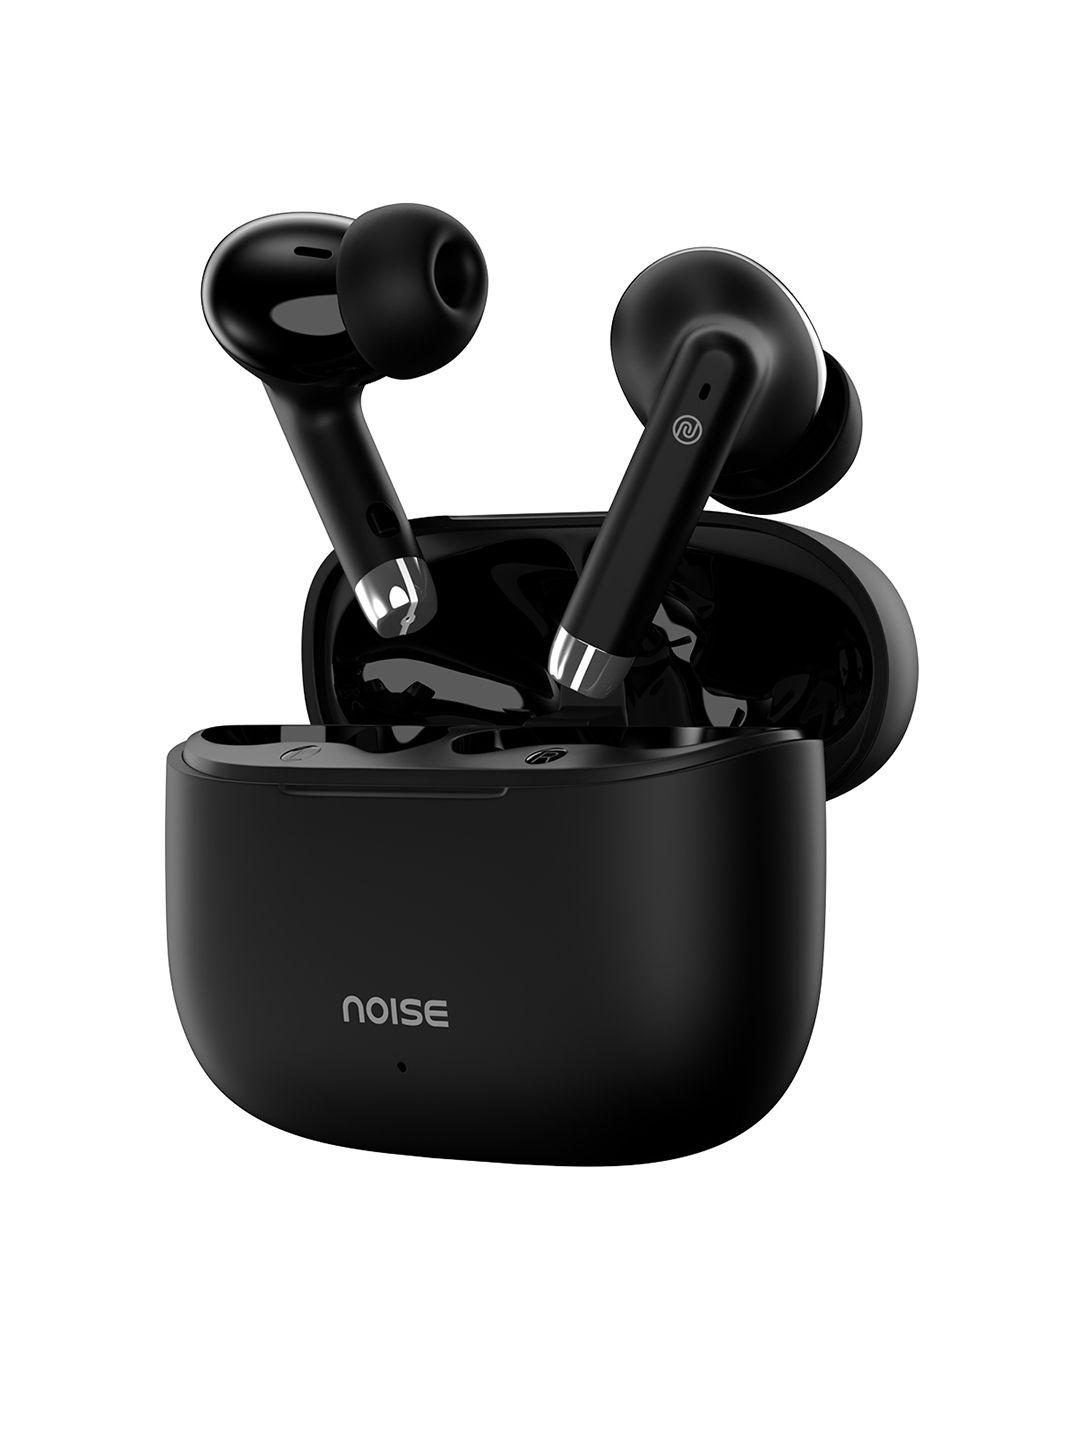 noise-buds-aero-truly-wireless-earbuds-with-45hrs-playtime-and-13mm-driver